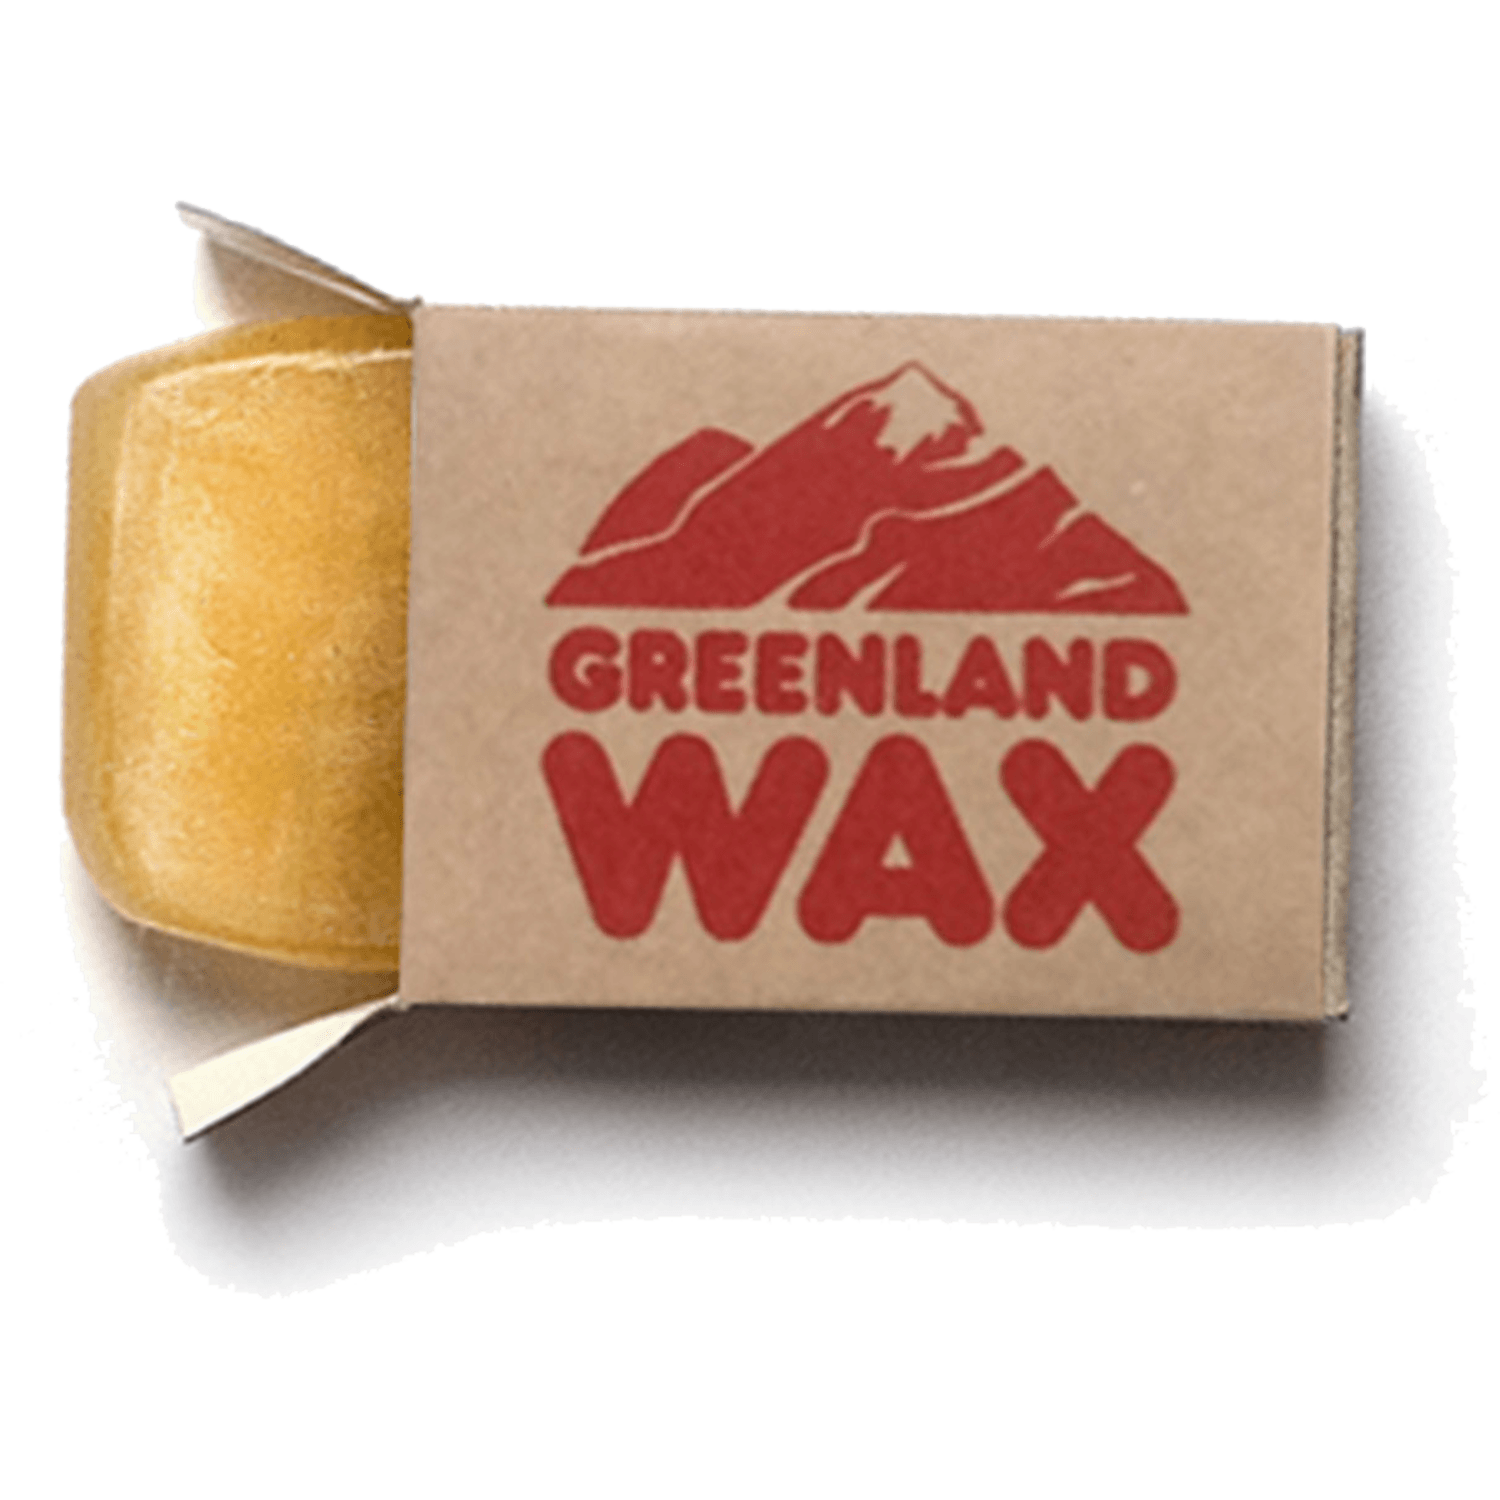 Fjällräven Greenland Wax Travel Pack - Paraffine & Beeswax Care products